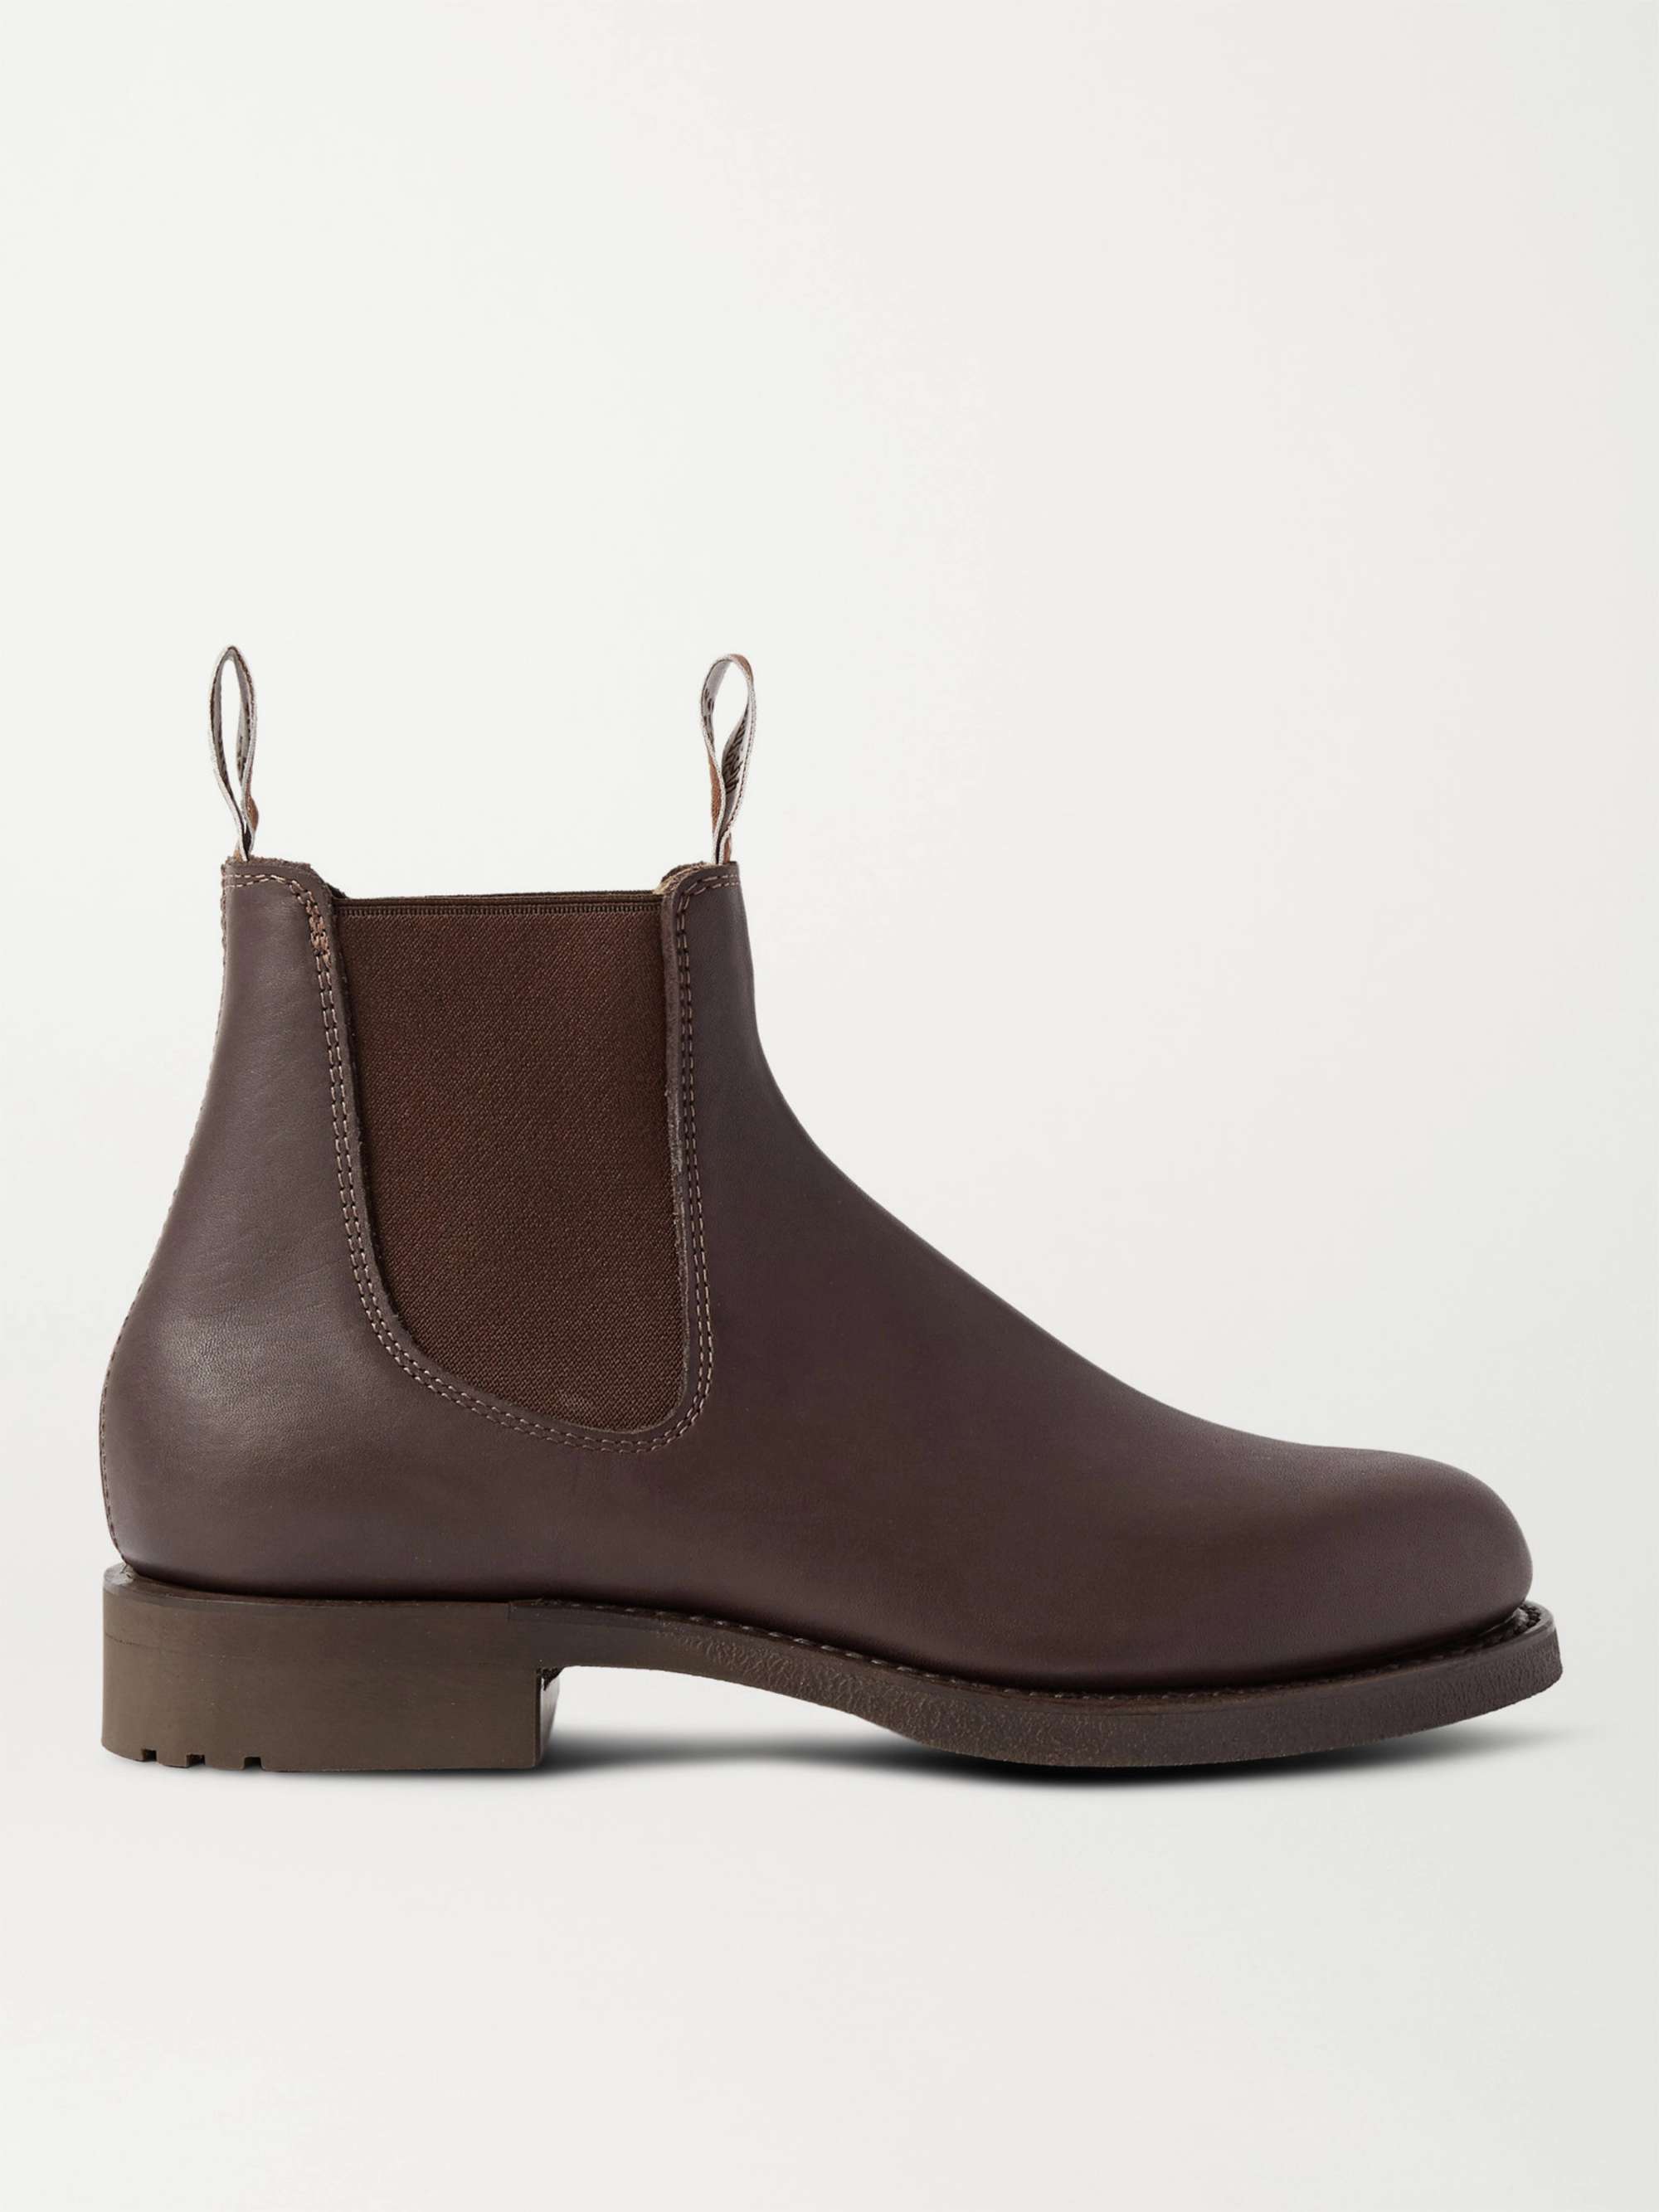 Brown Gardener Whole-Cut Leather Chelsea Boots | R.M.WILLIAMS | MR PORTER